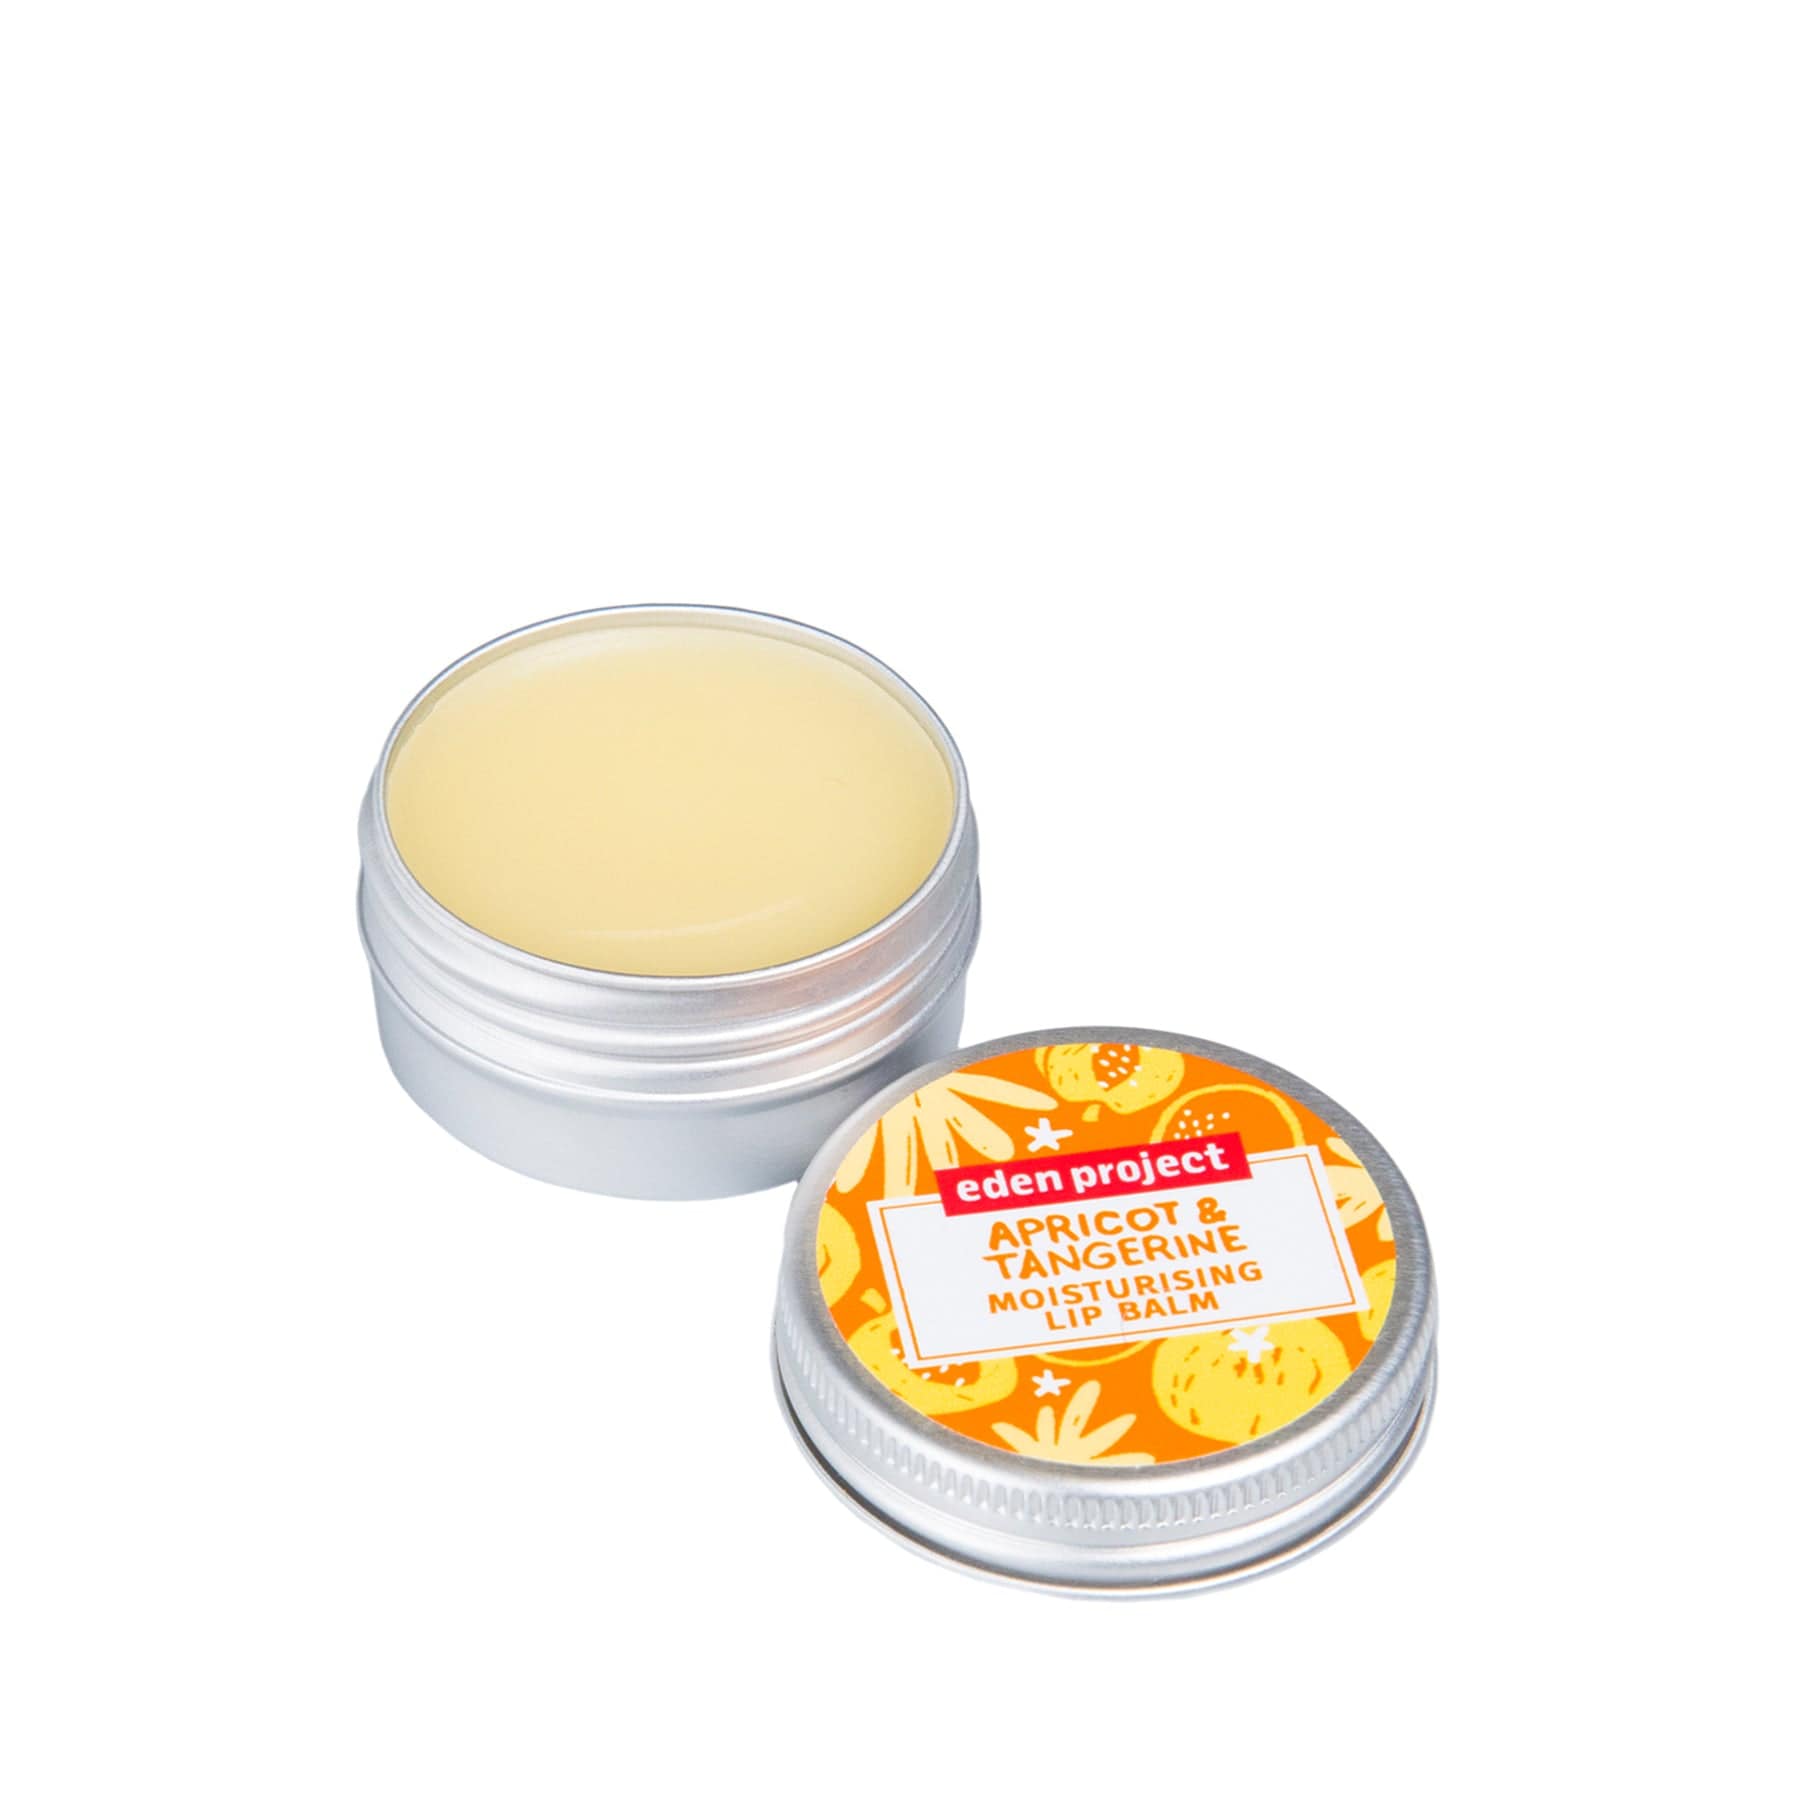 Open container of apricot and tangerine moisturizing lip balm with Eden Project branding on white background